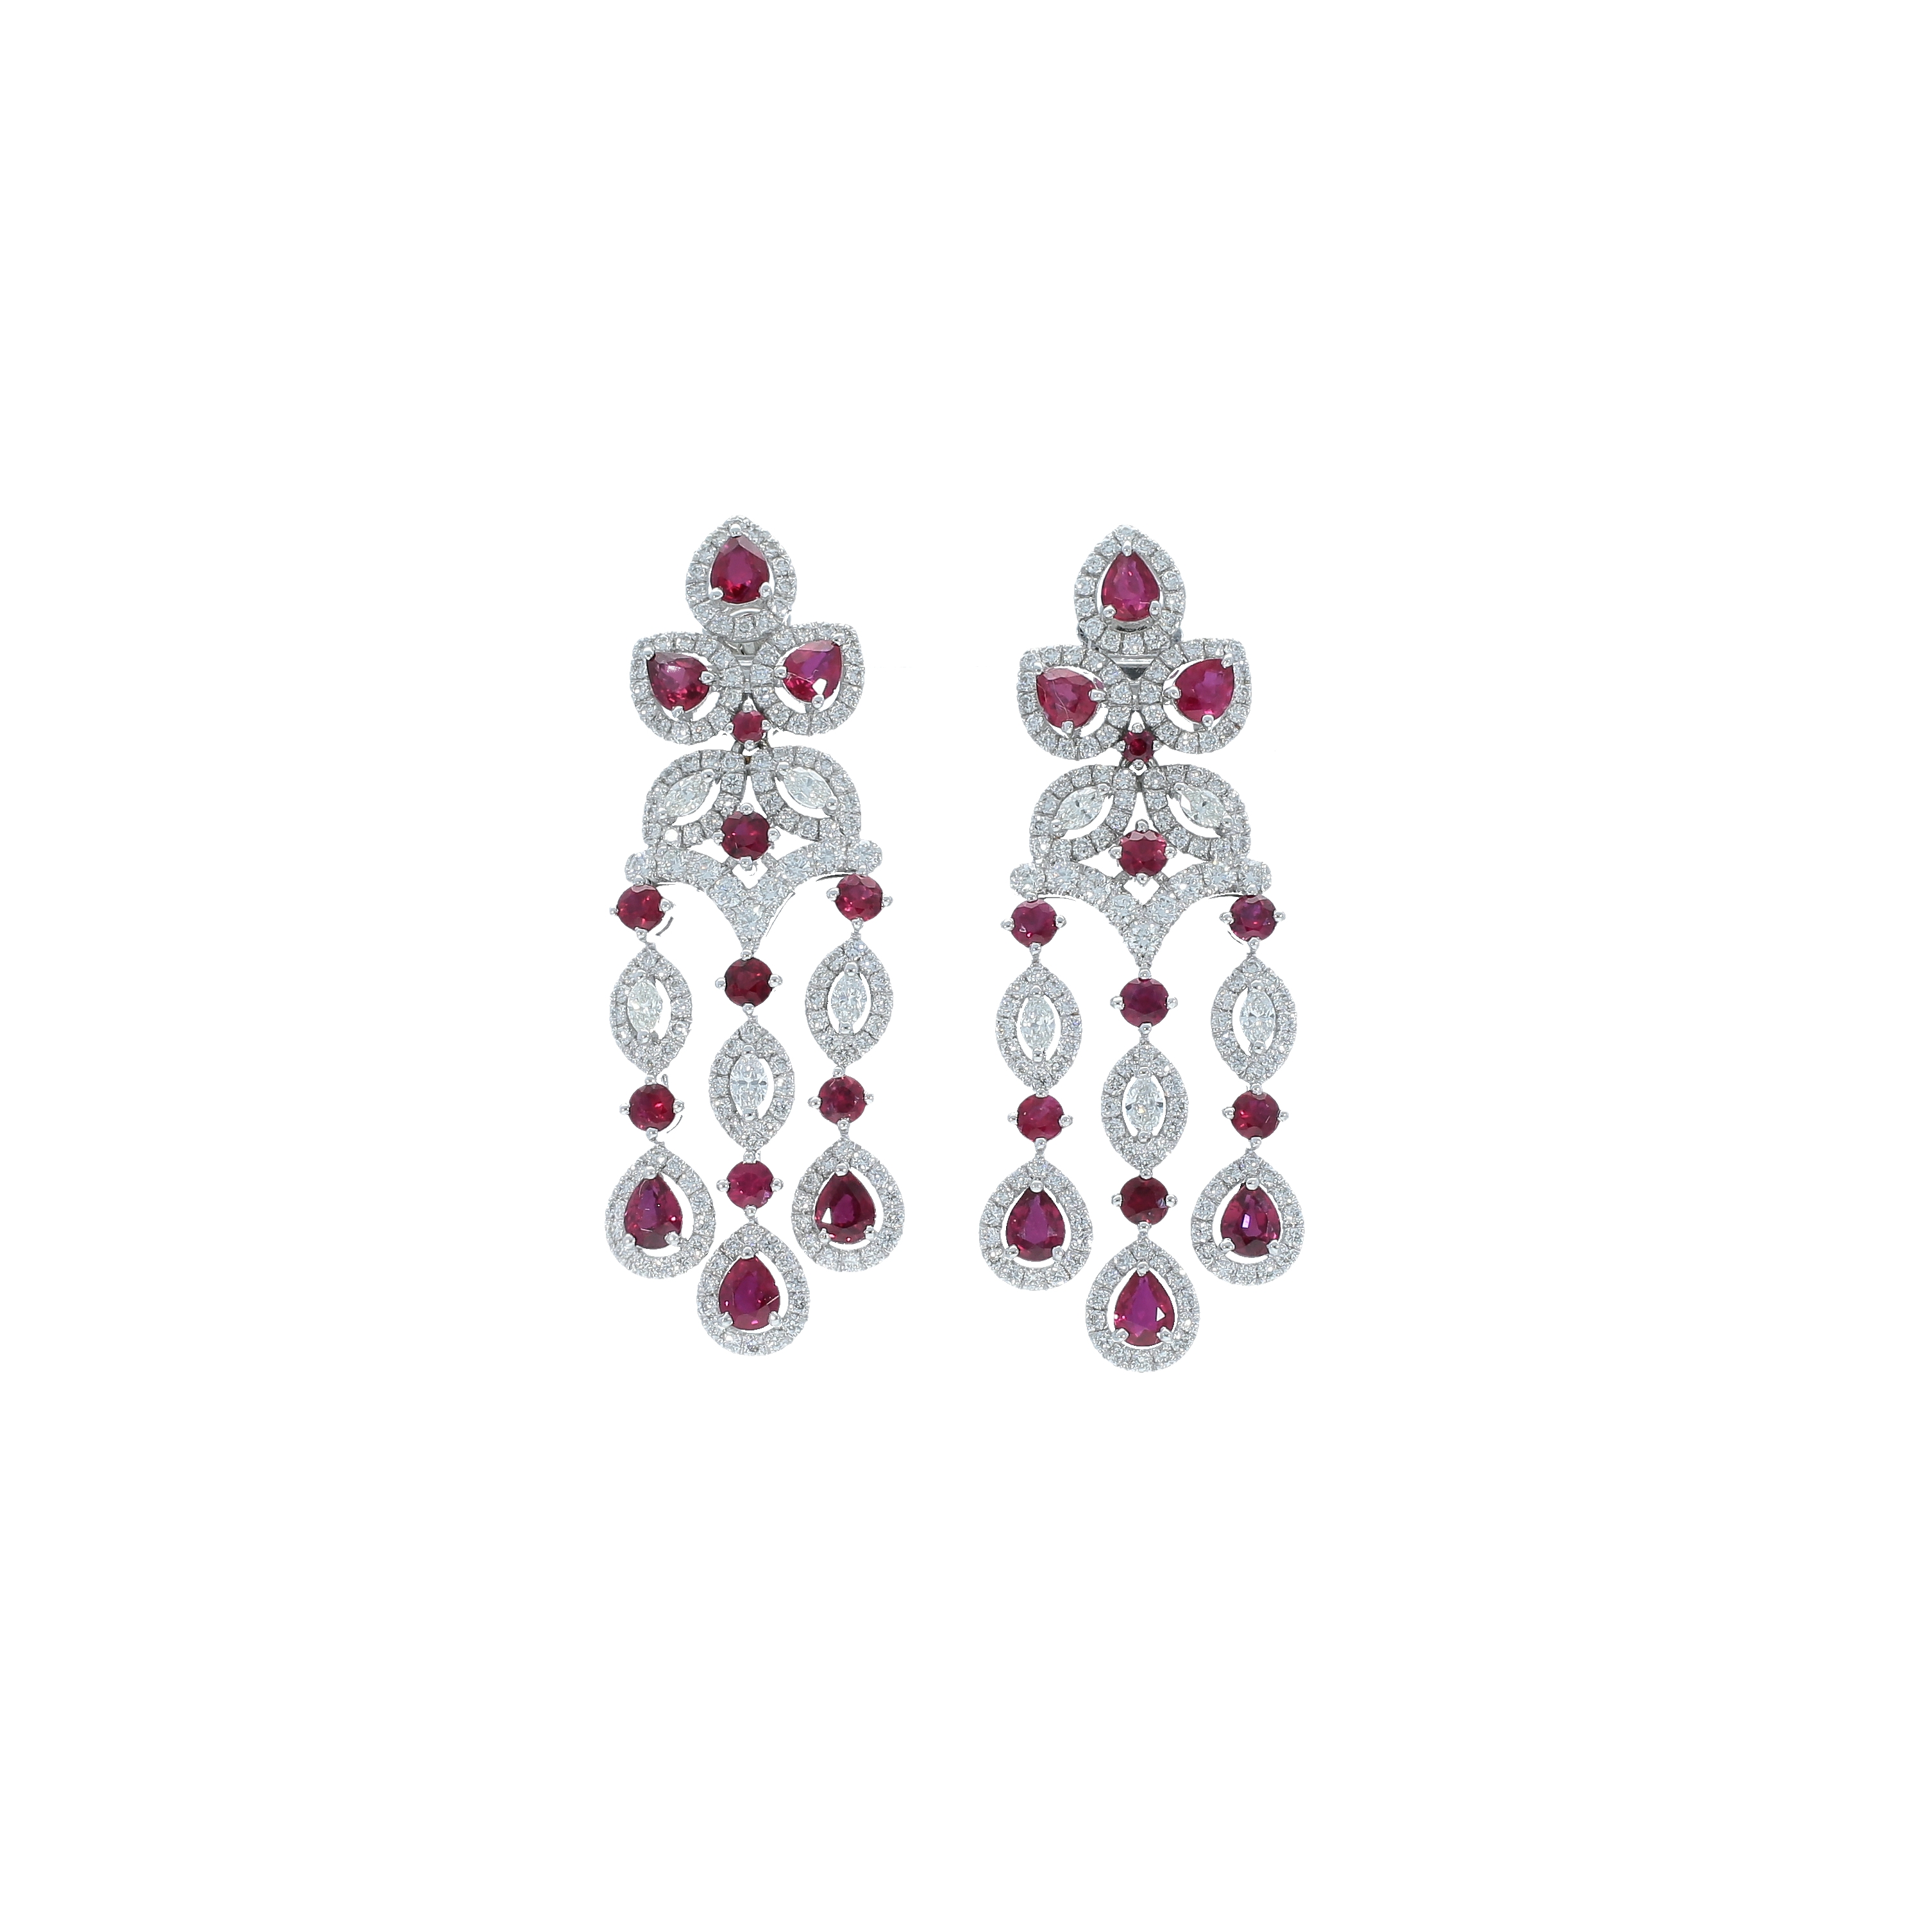 Rubies and diamonds Chandelier earrings design in white gold 18kt